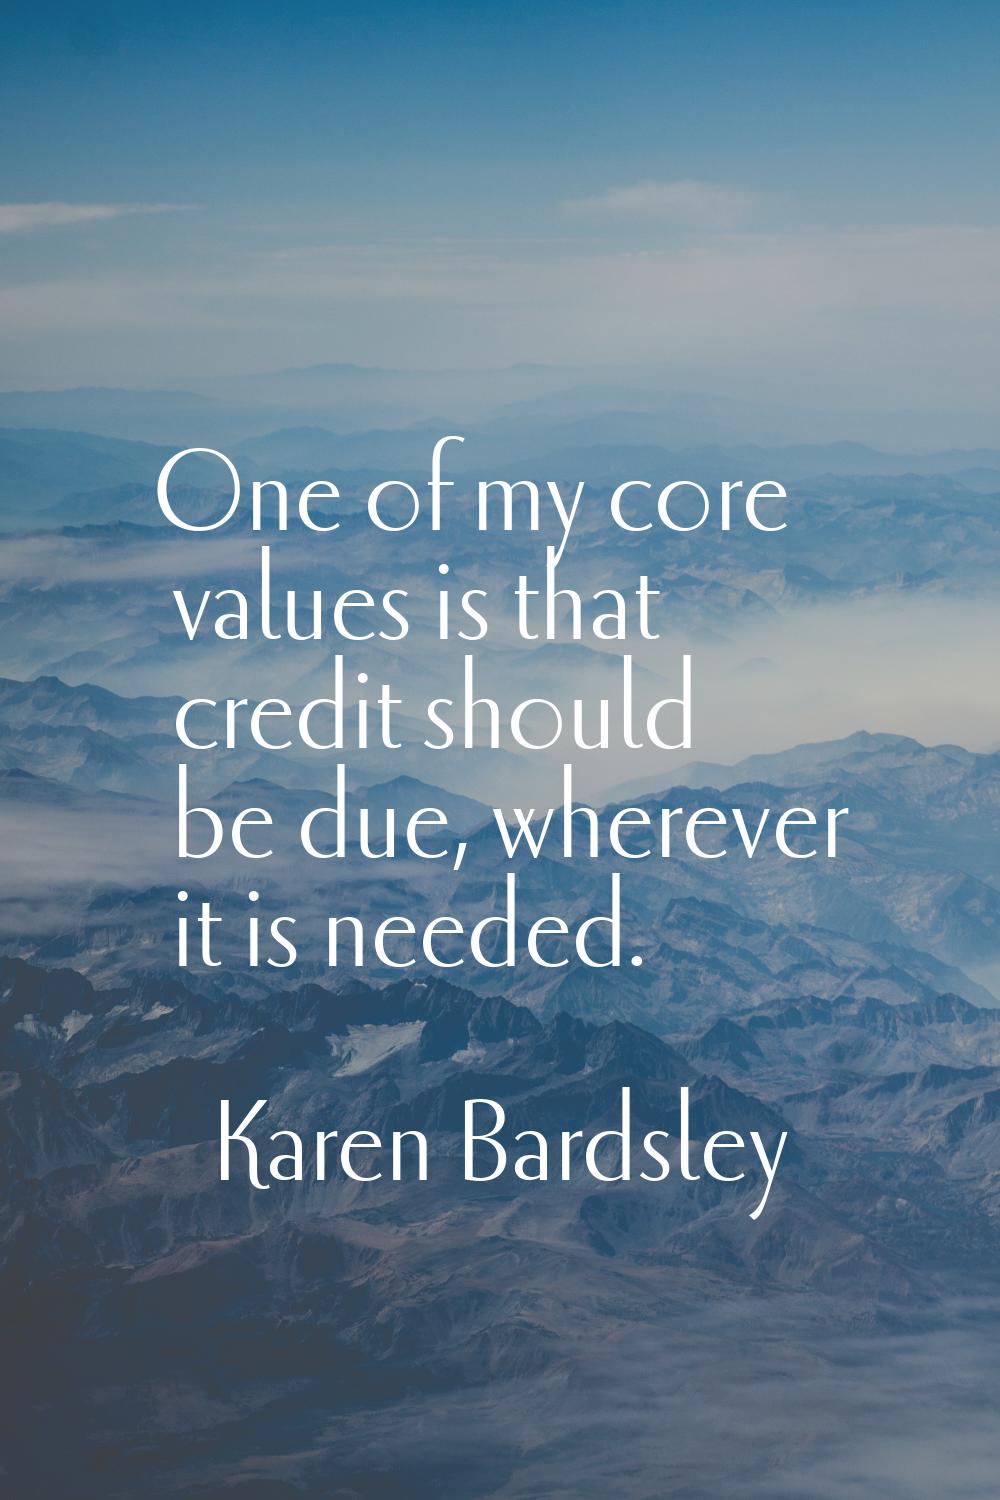 One of my core values is that credit should be due, wherever it is needed.